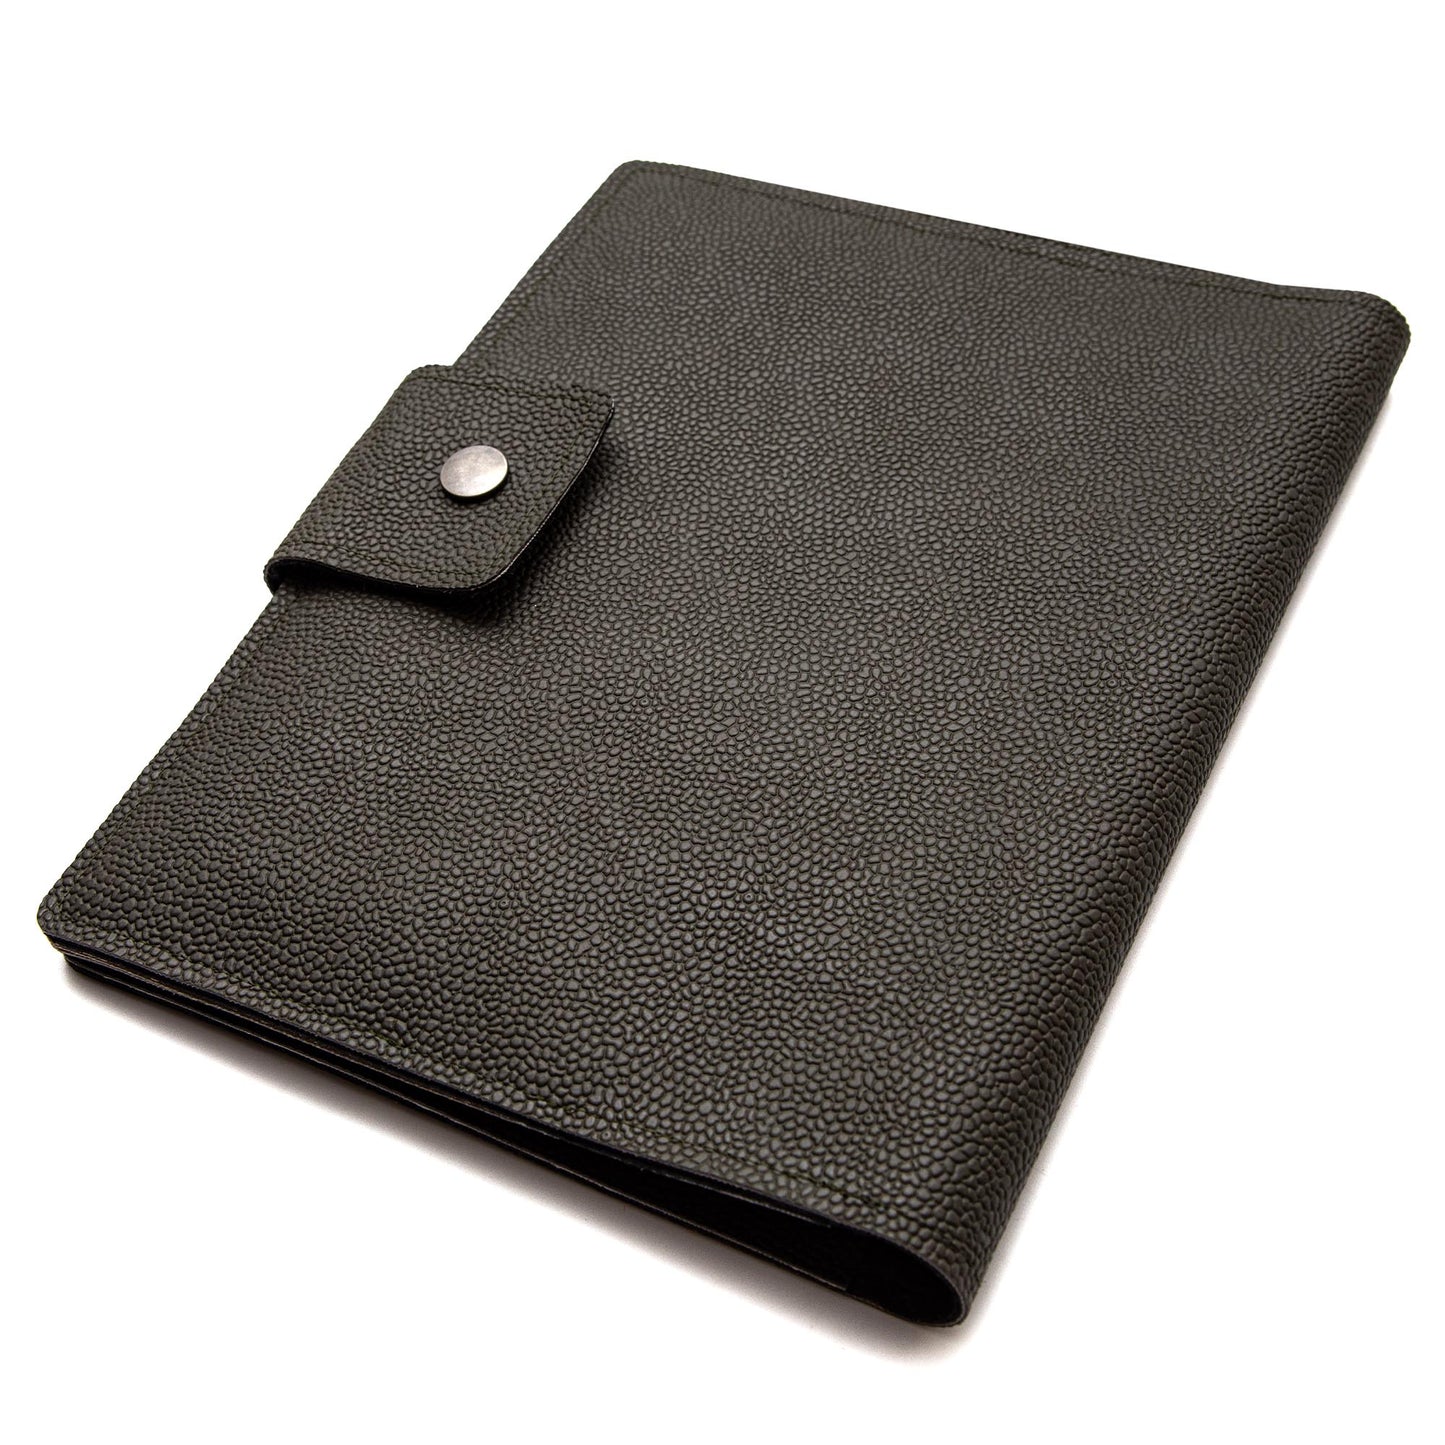 Handmade Folio Cover for iPad/Pro/Air - Dark Green Faux Leather